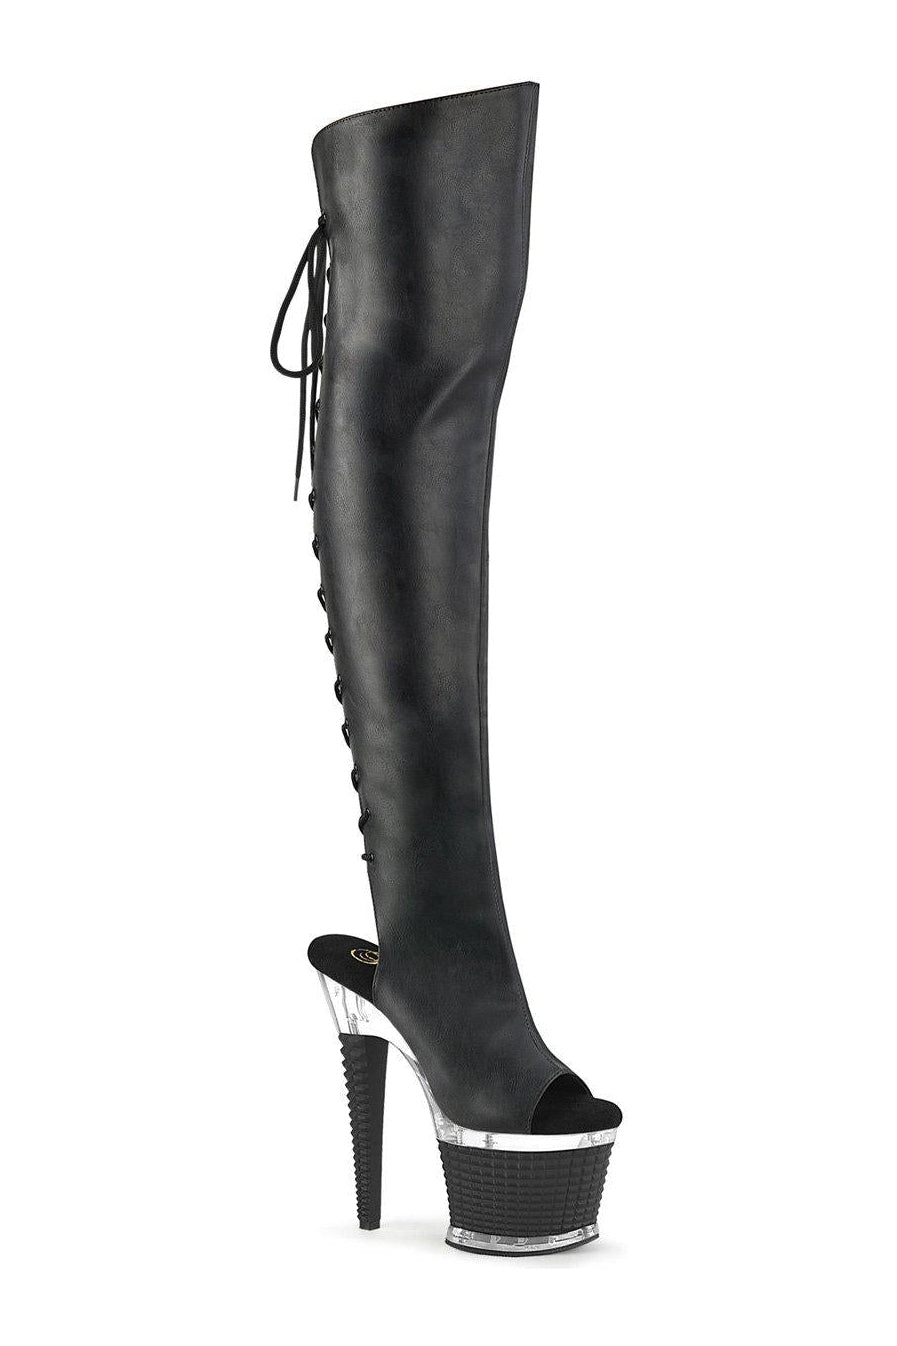 SPECTATOR-3019 Thigh Boot | Black Faux Leather-Thigh Boots-Pleaser-Black-7-Faux Leather-SEXYSHOES.COM